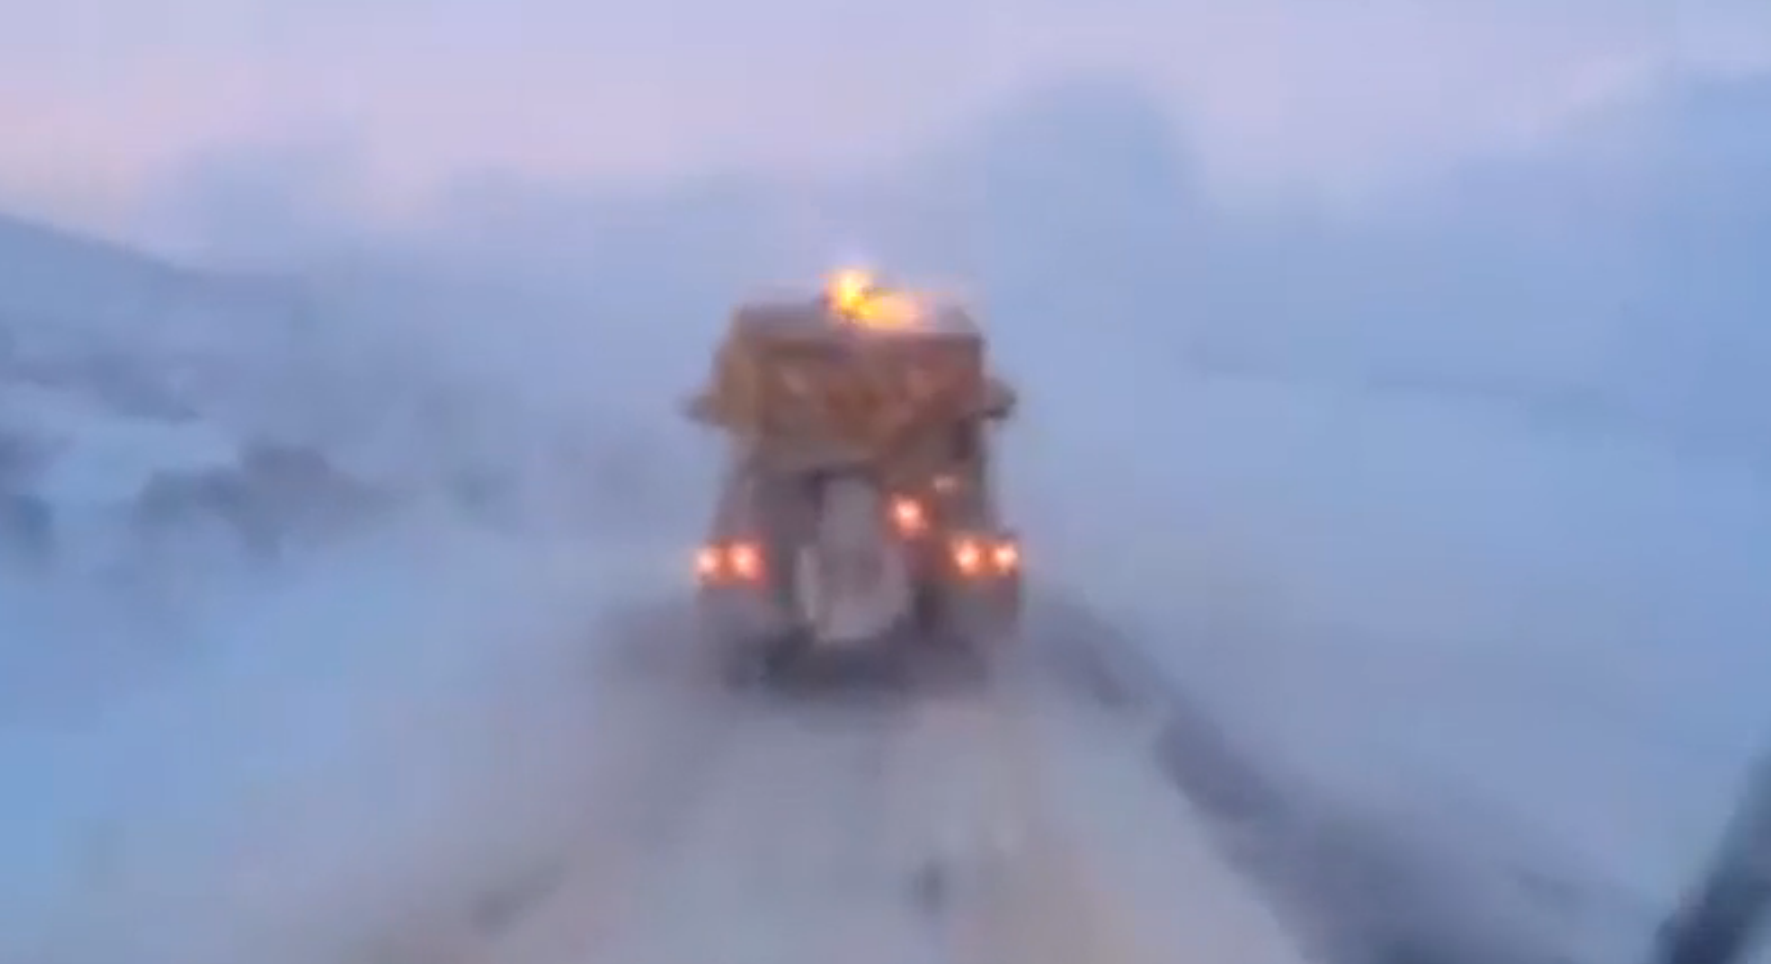 Footage shows hazardous driving conditions